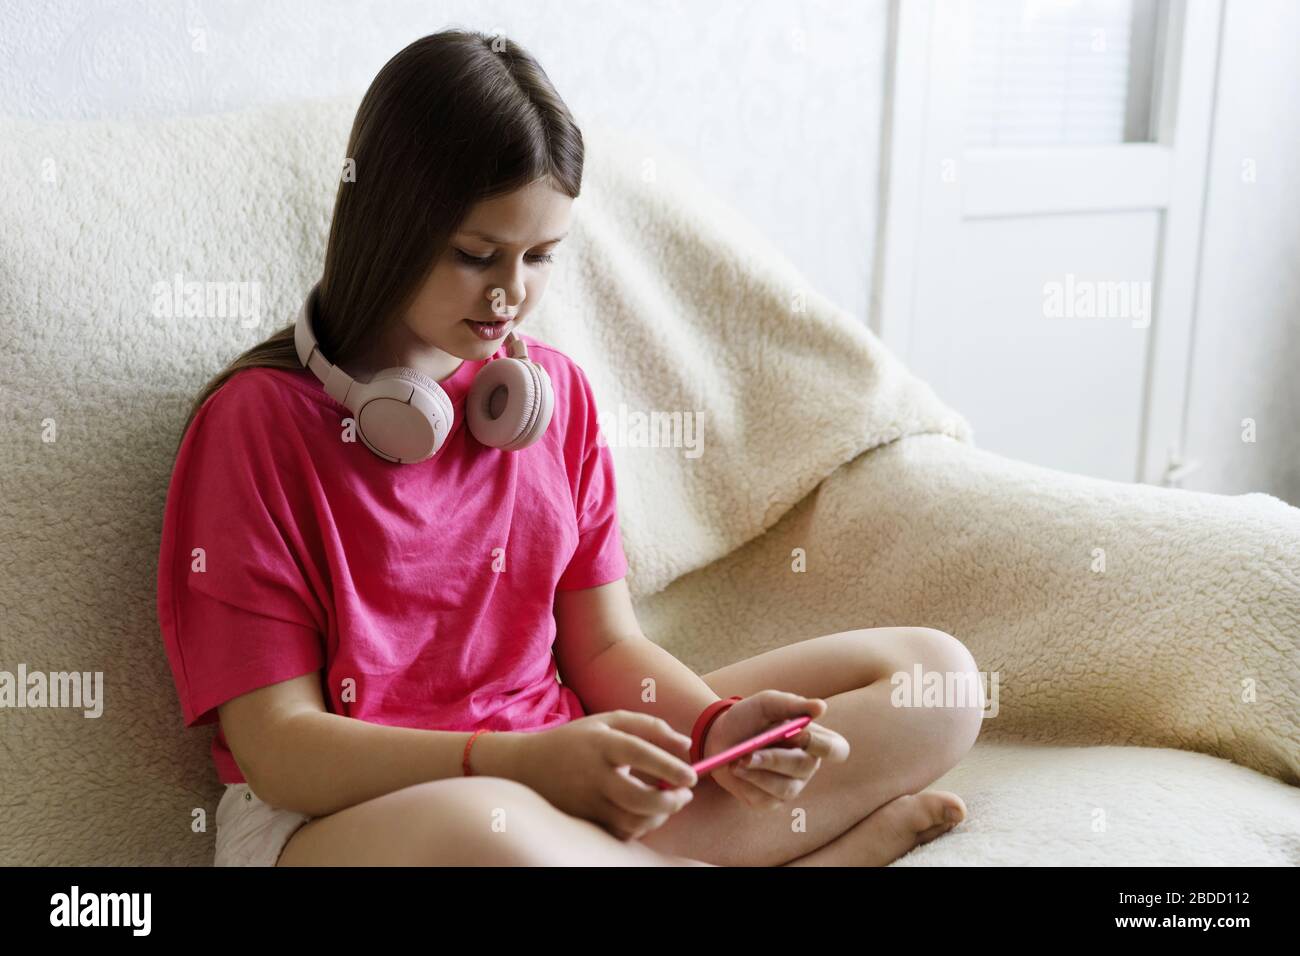 Cheerful girl in pink headphones sits with a phone in her hand  Stock Photo